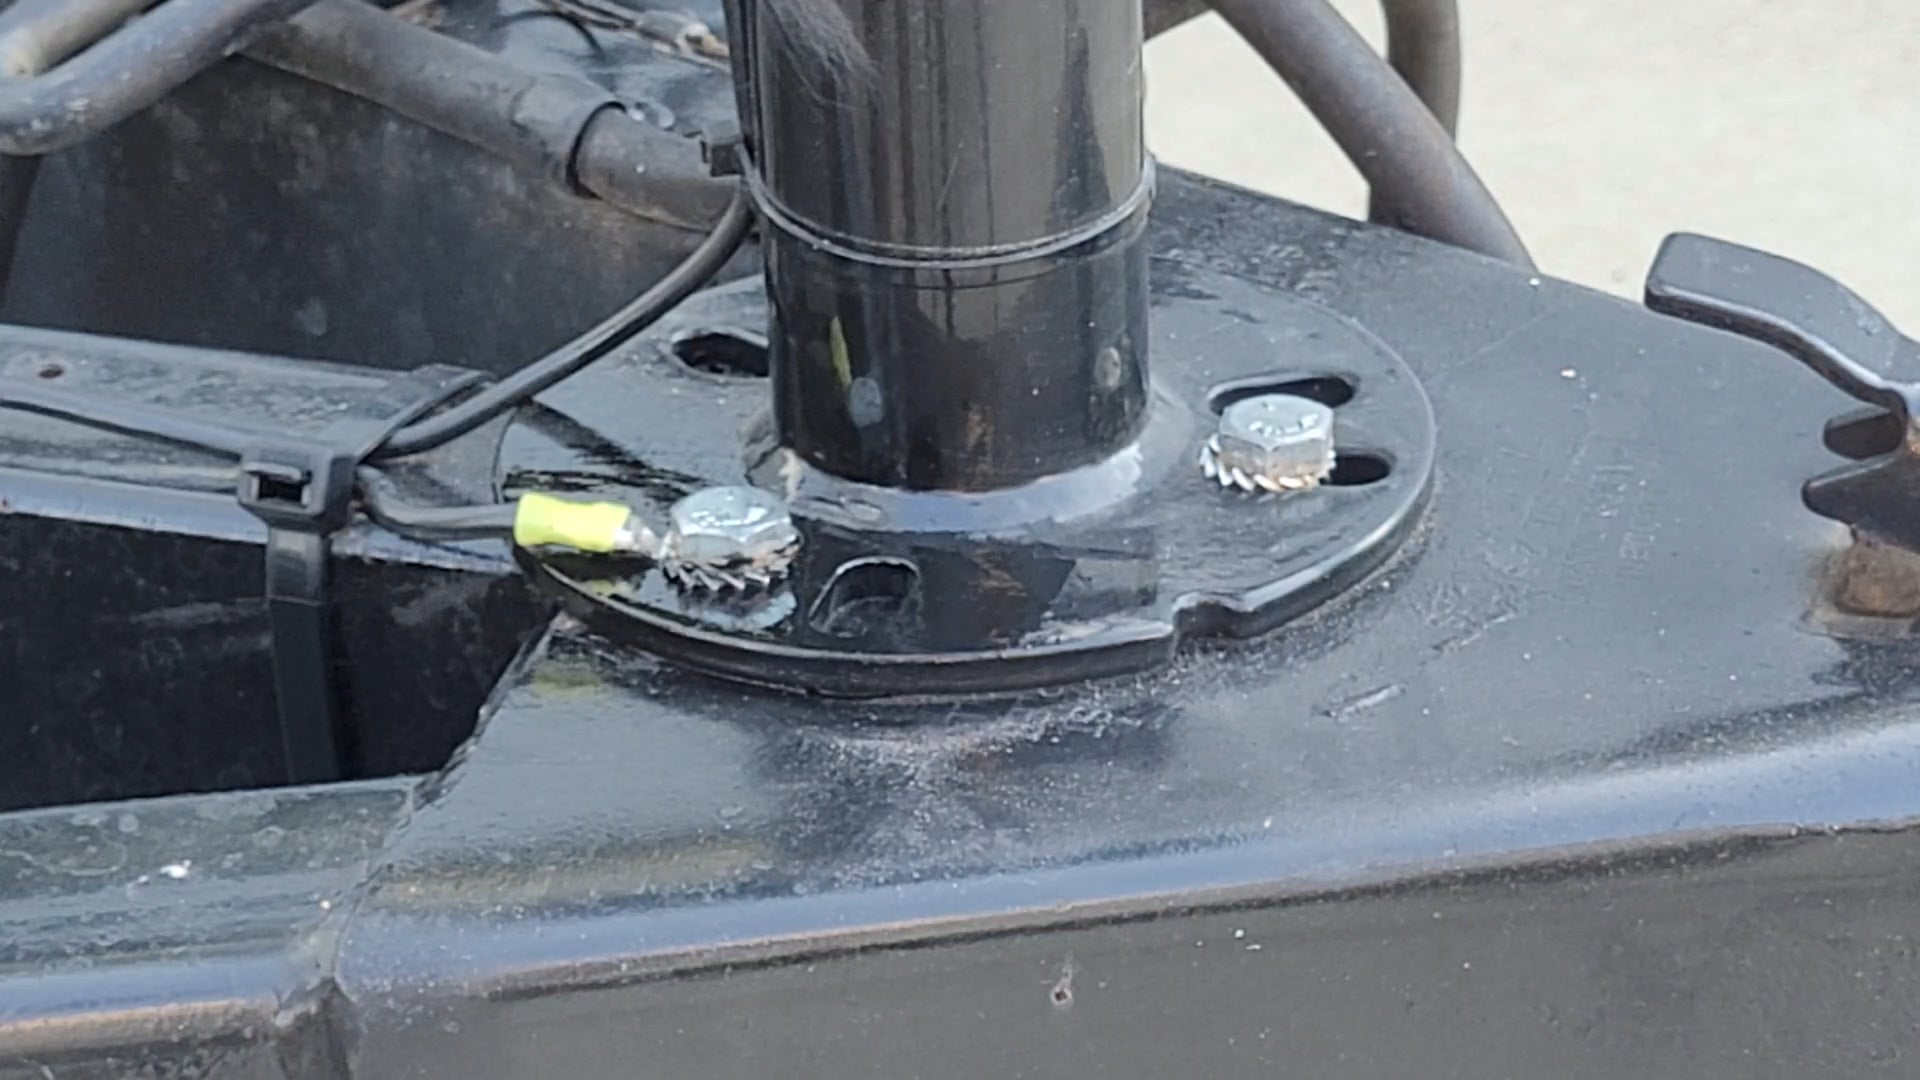 connect the negative wire to a mounting bolt